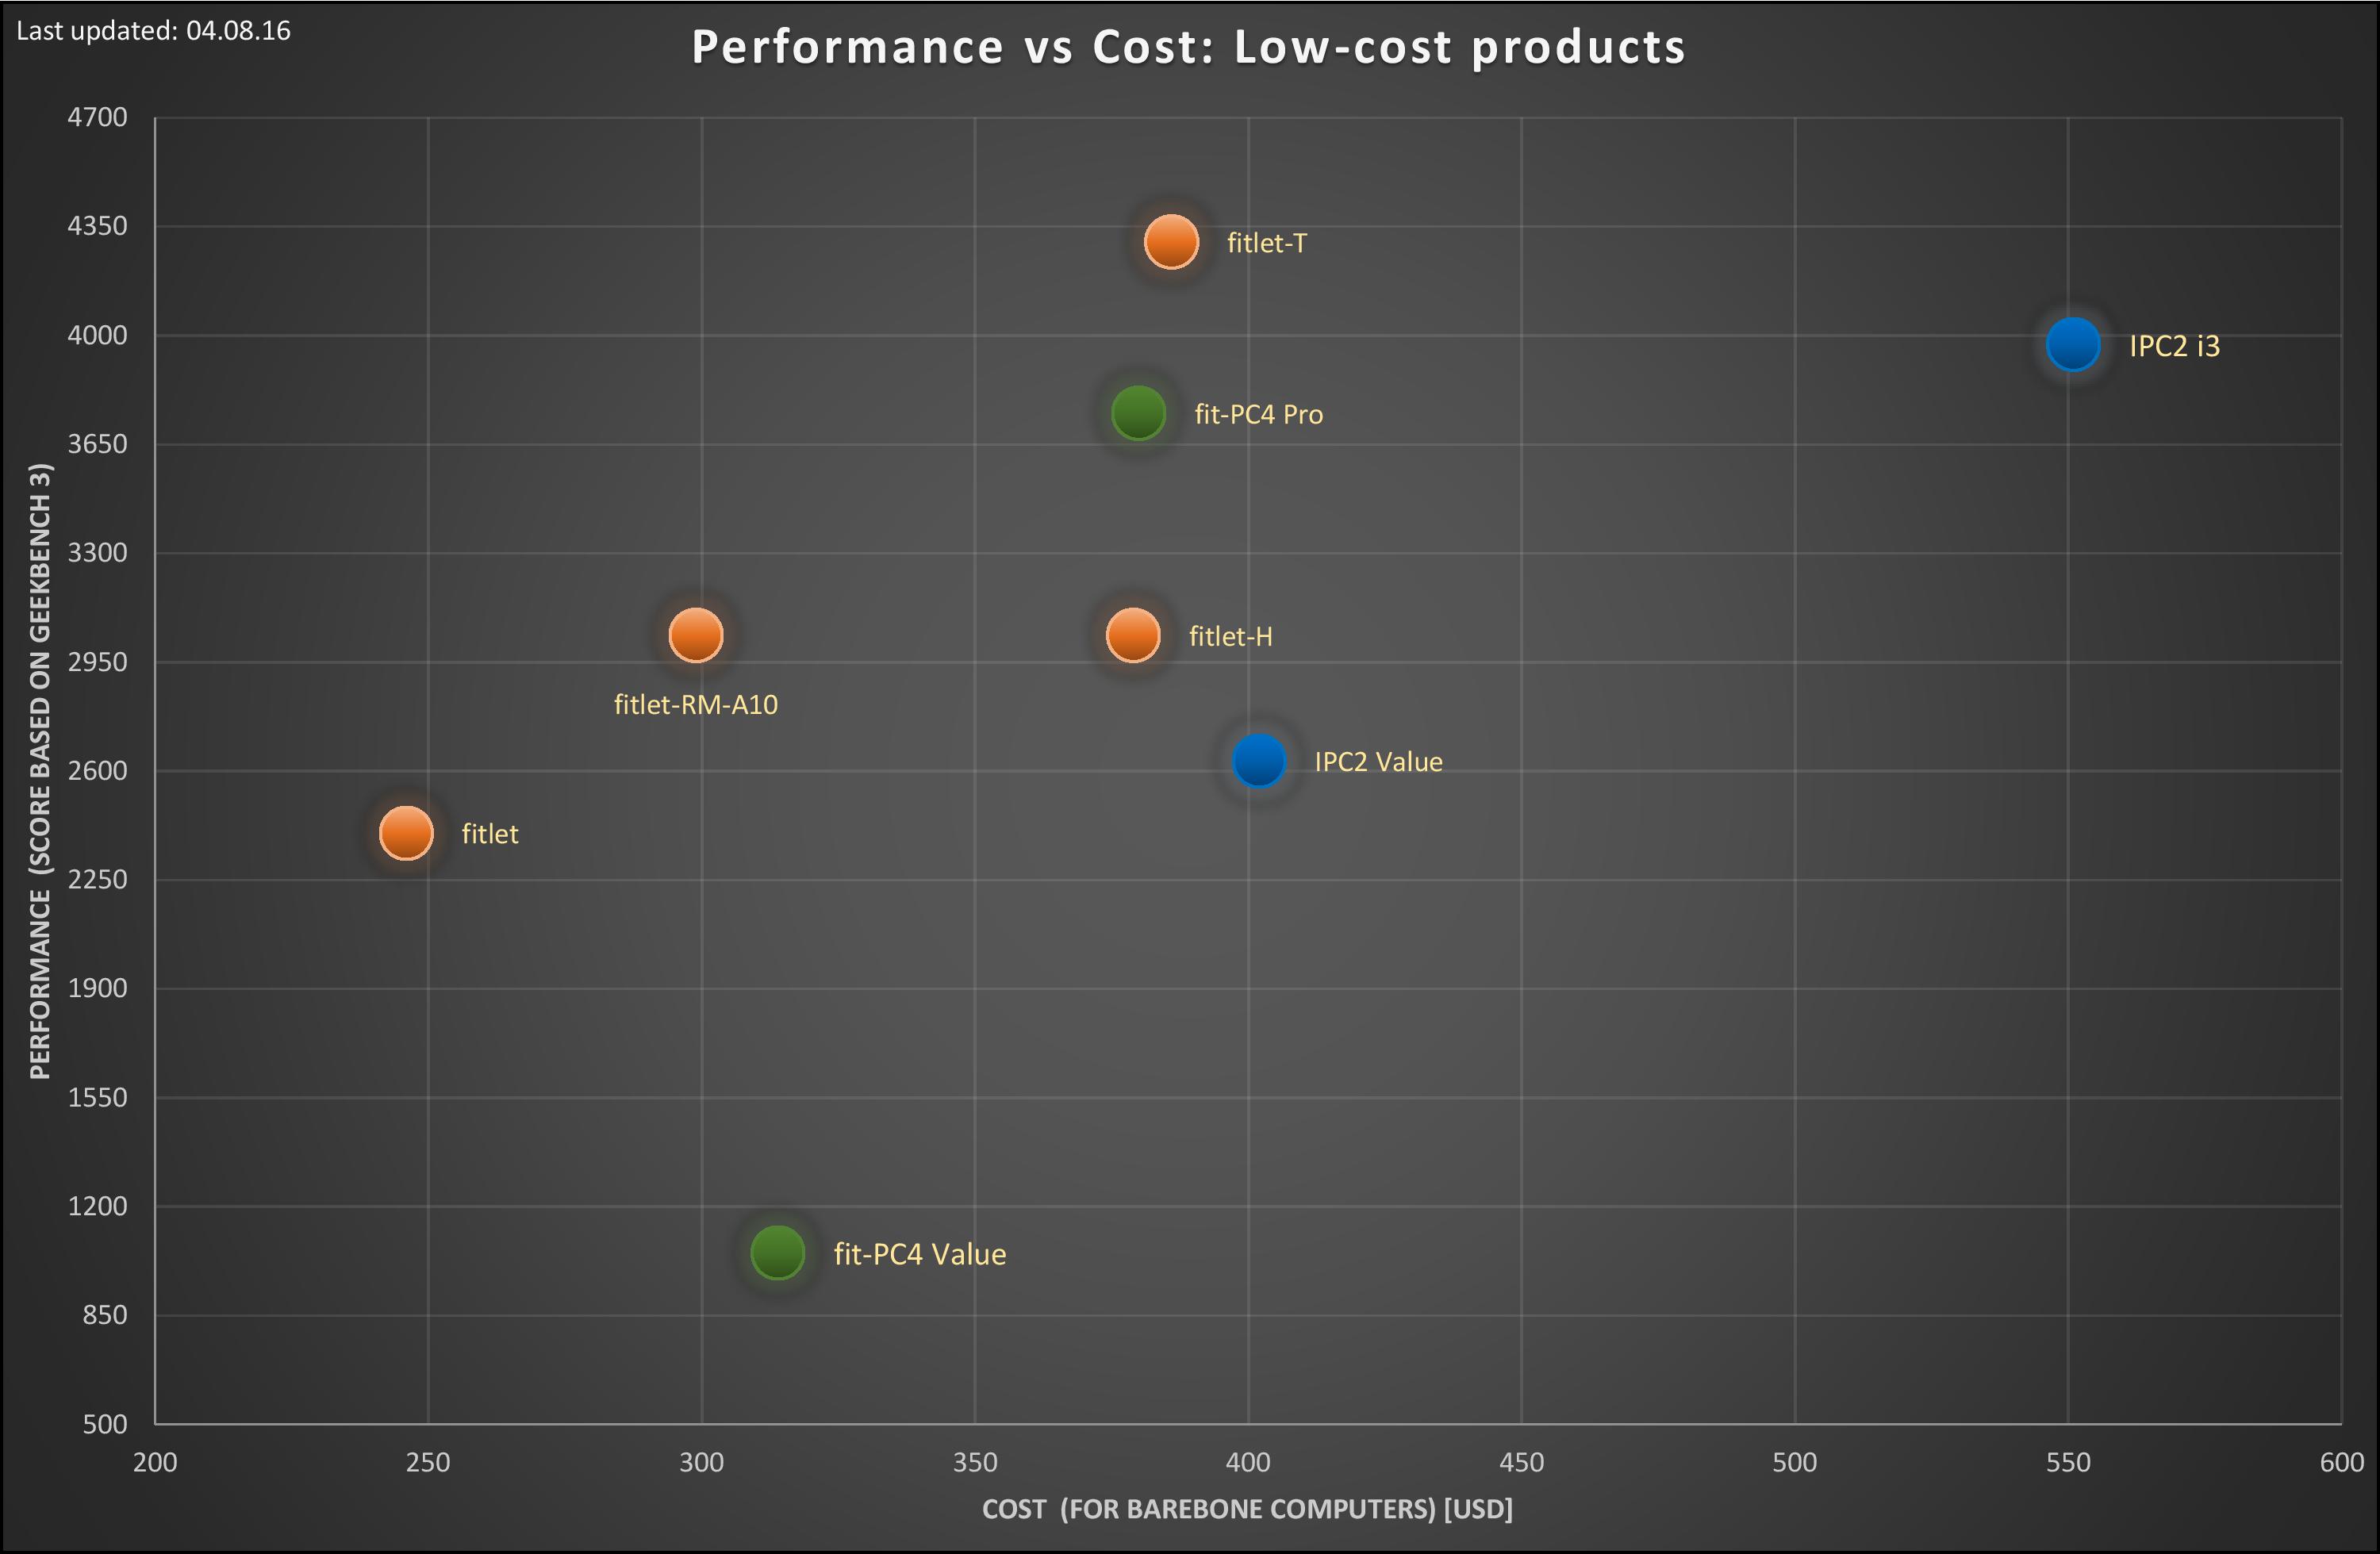 Performance-vs-cost-analysis-low-cost 04.08.16.jpg